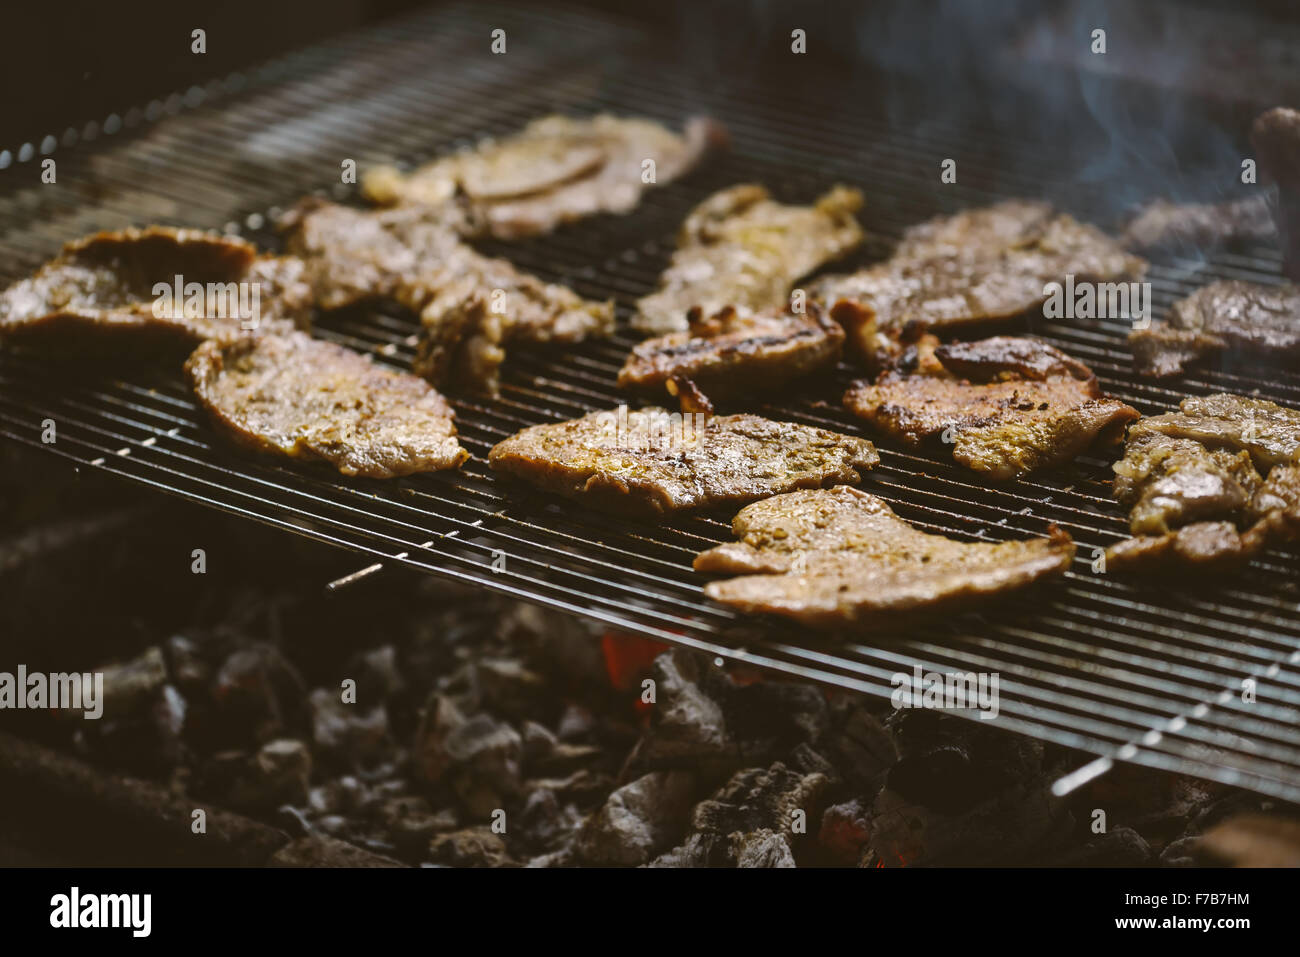 Pork meat chops on barbecue, natural light, retro toned, selective focus with shallow depth of field. Stock Photo